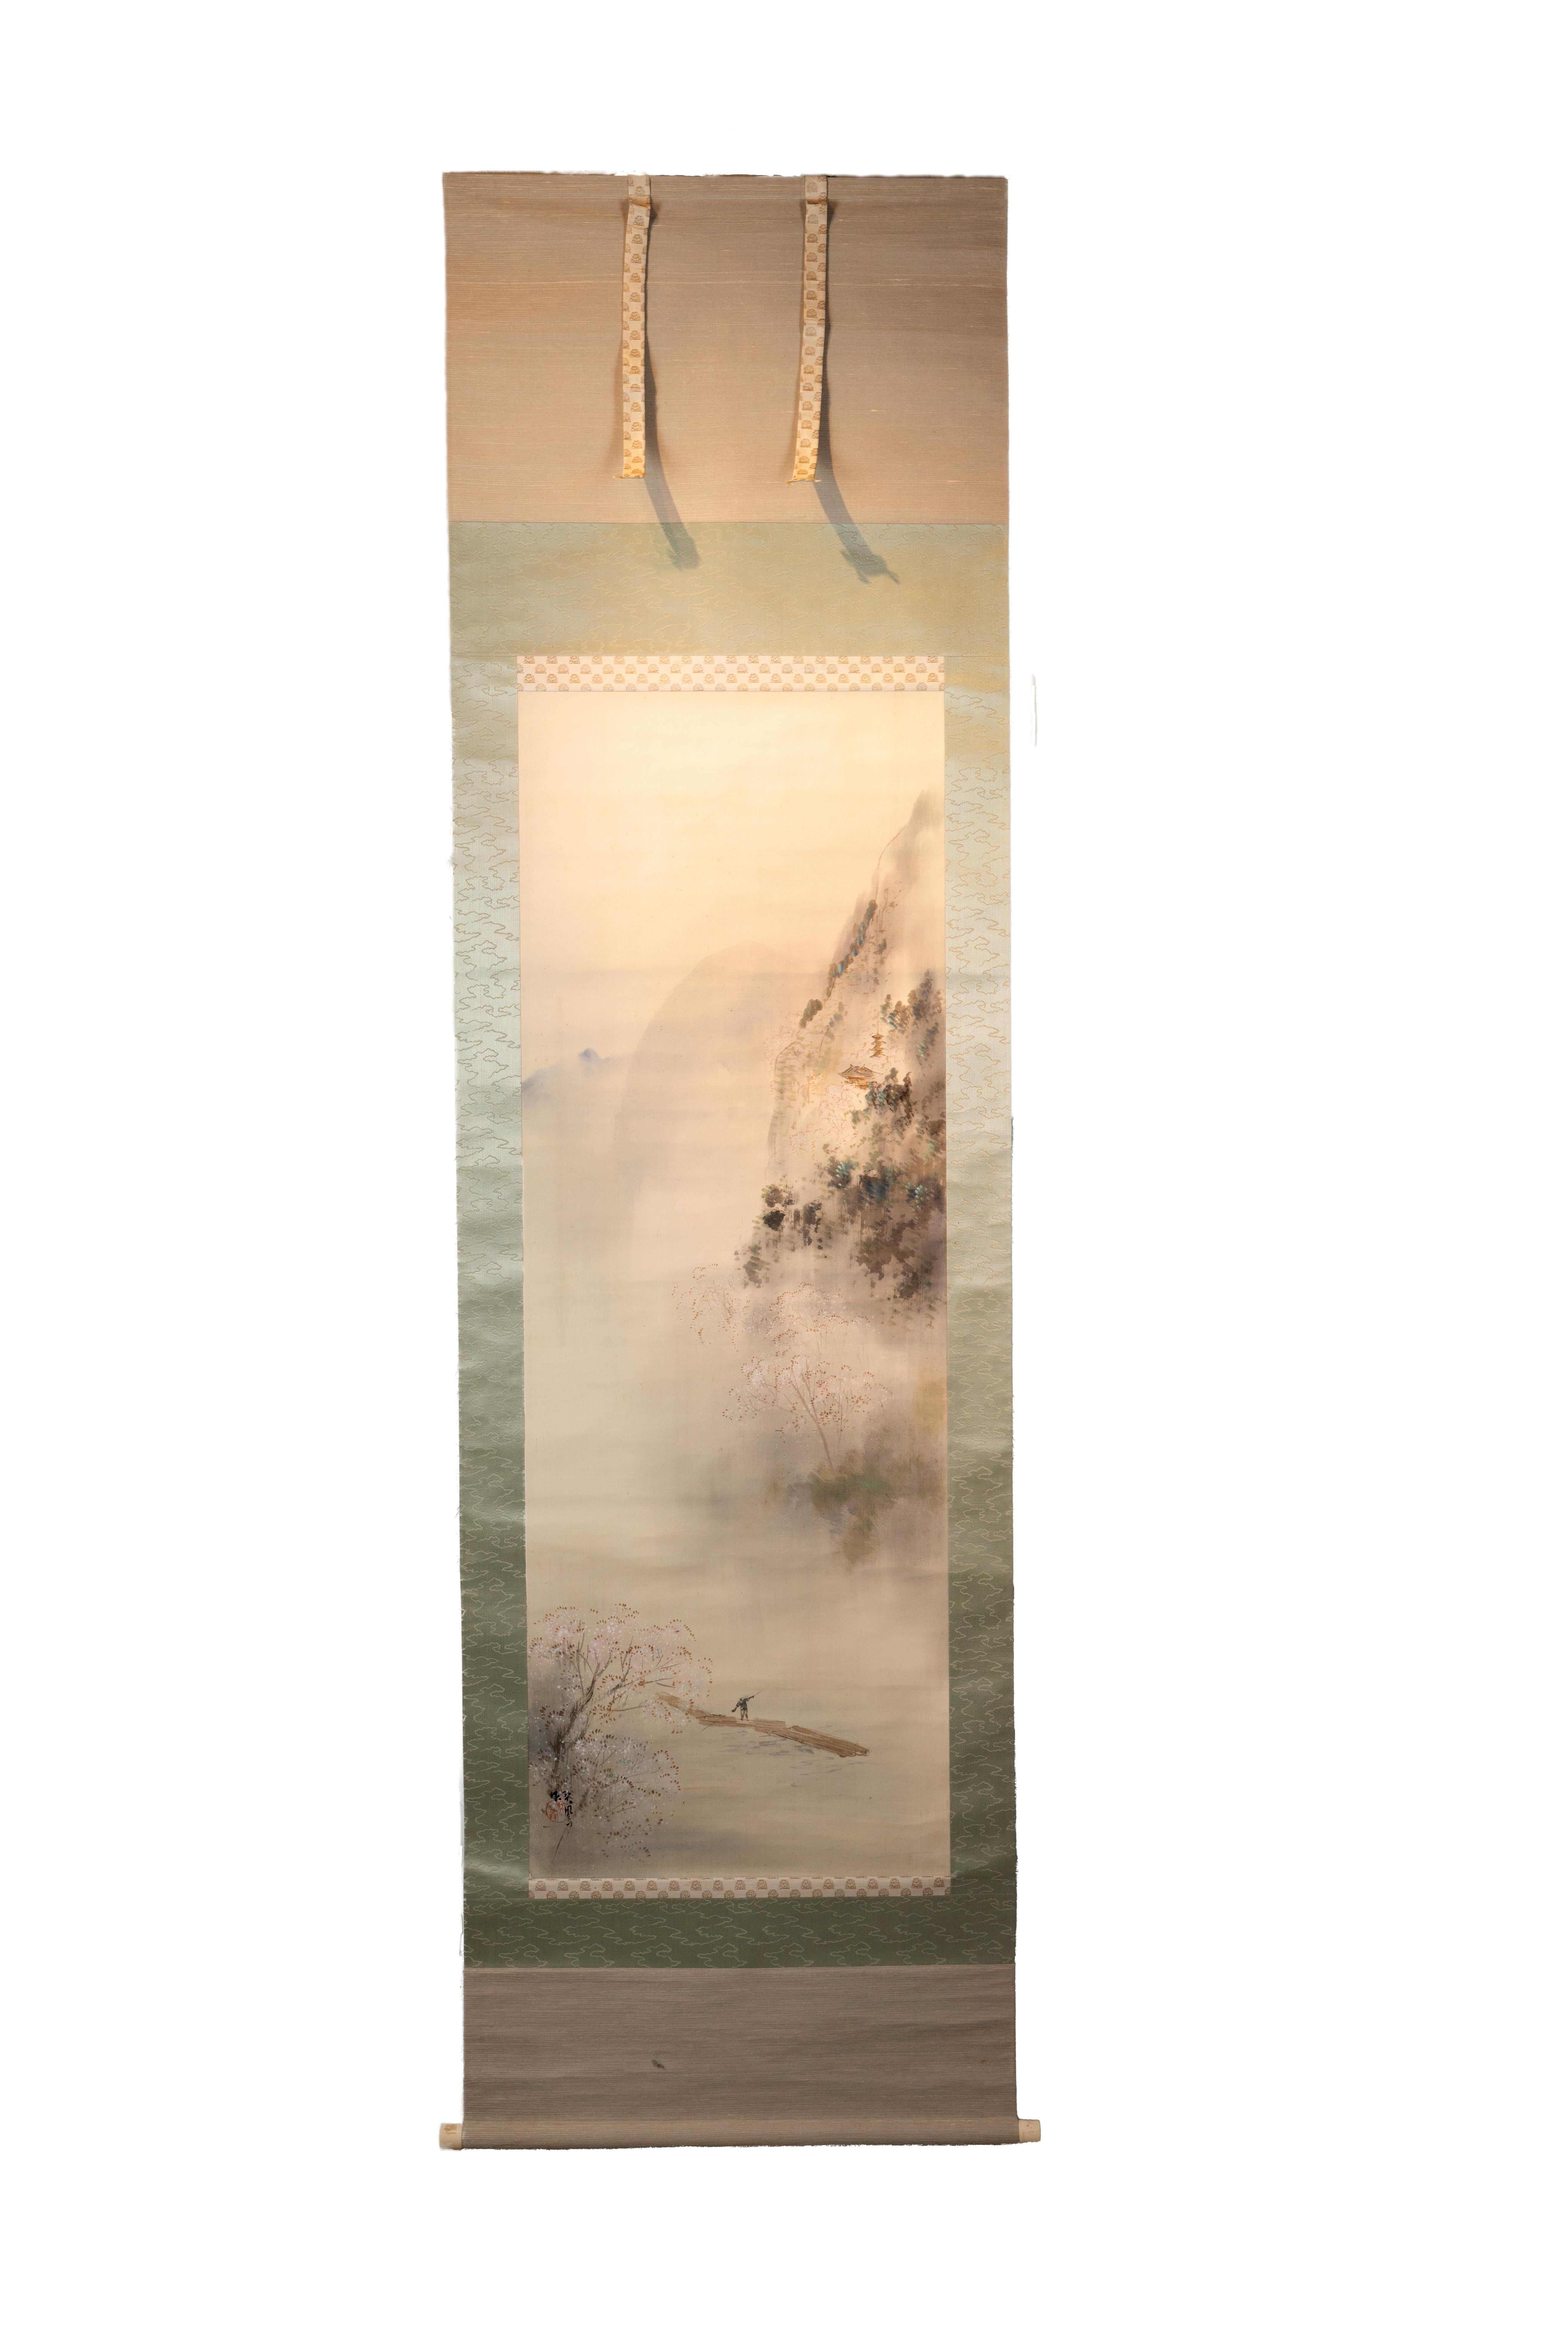 This 77" x 22" Japanese Antique Scroll depicts a serene and foggy landscape painting on silk with a figure positioned in the lower half of the composition. The figure stands on what appears to be a raft or a bridge upon a body of water and holds an